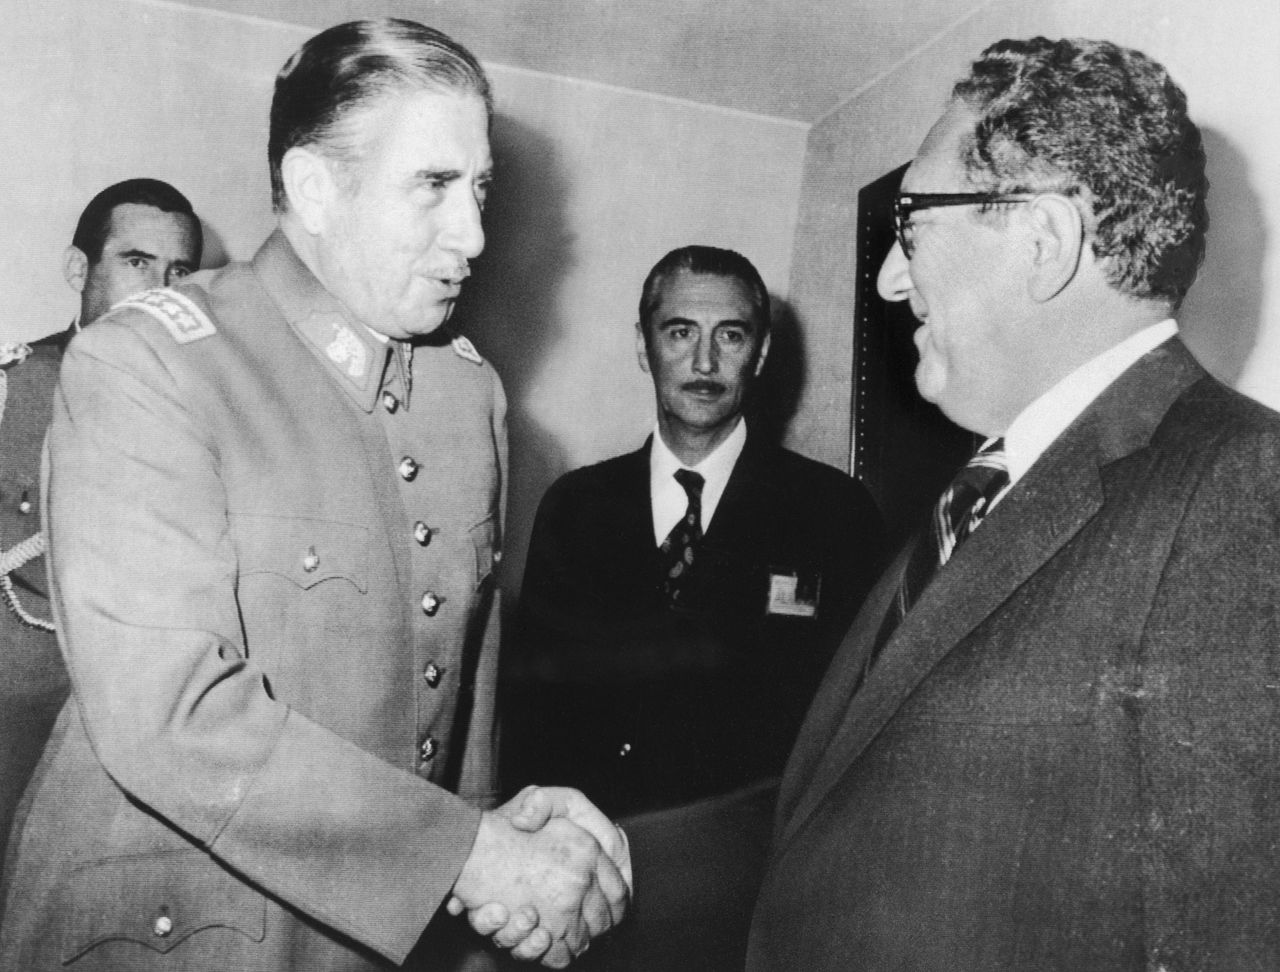 Chilean dictator Augusto Pinochet, an Army general, took power in a U.S.-supported coup in 1973 and embarked on a brutal reign of tyranny. Kissinger knew of the abuses and murders that took place on Pinochet's watch but regarded him as a defense against communism even as his contemporaries in the State Department criticized his approach.